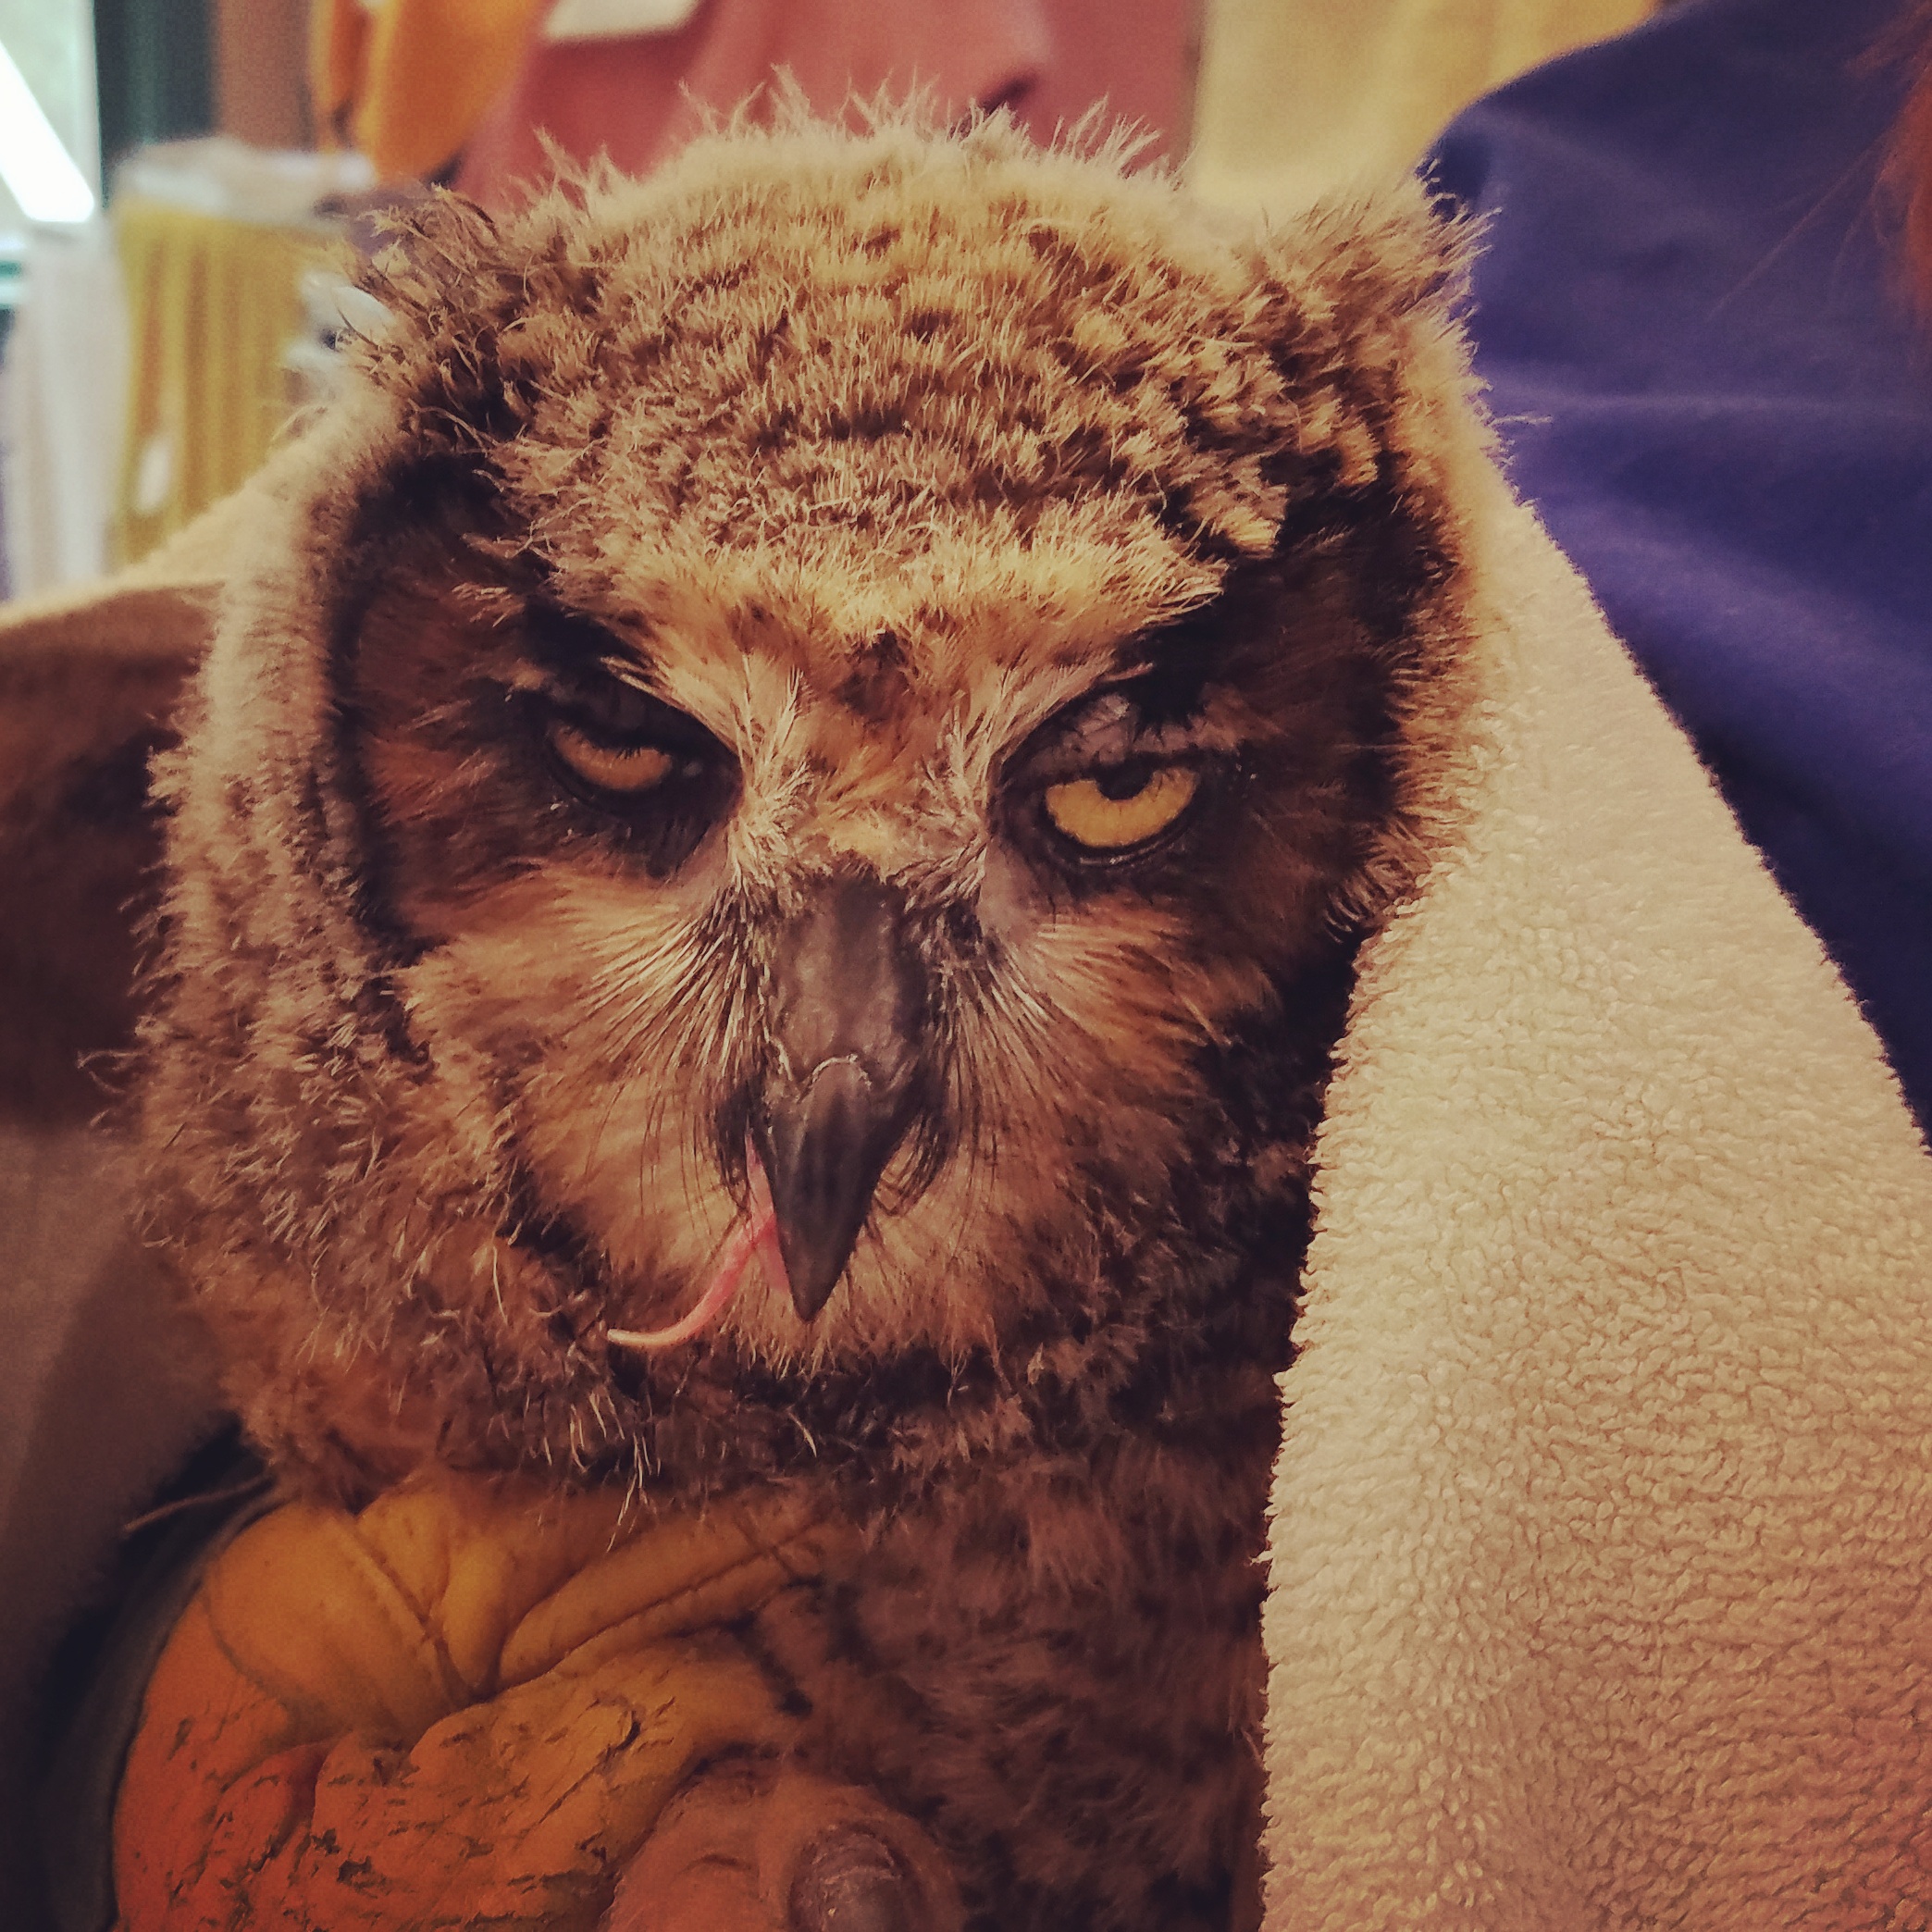 Great Horned Owlet Admitted to Hospital